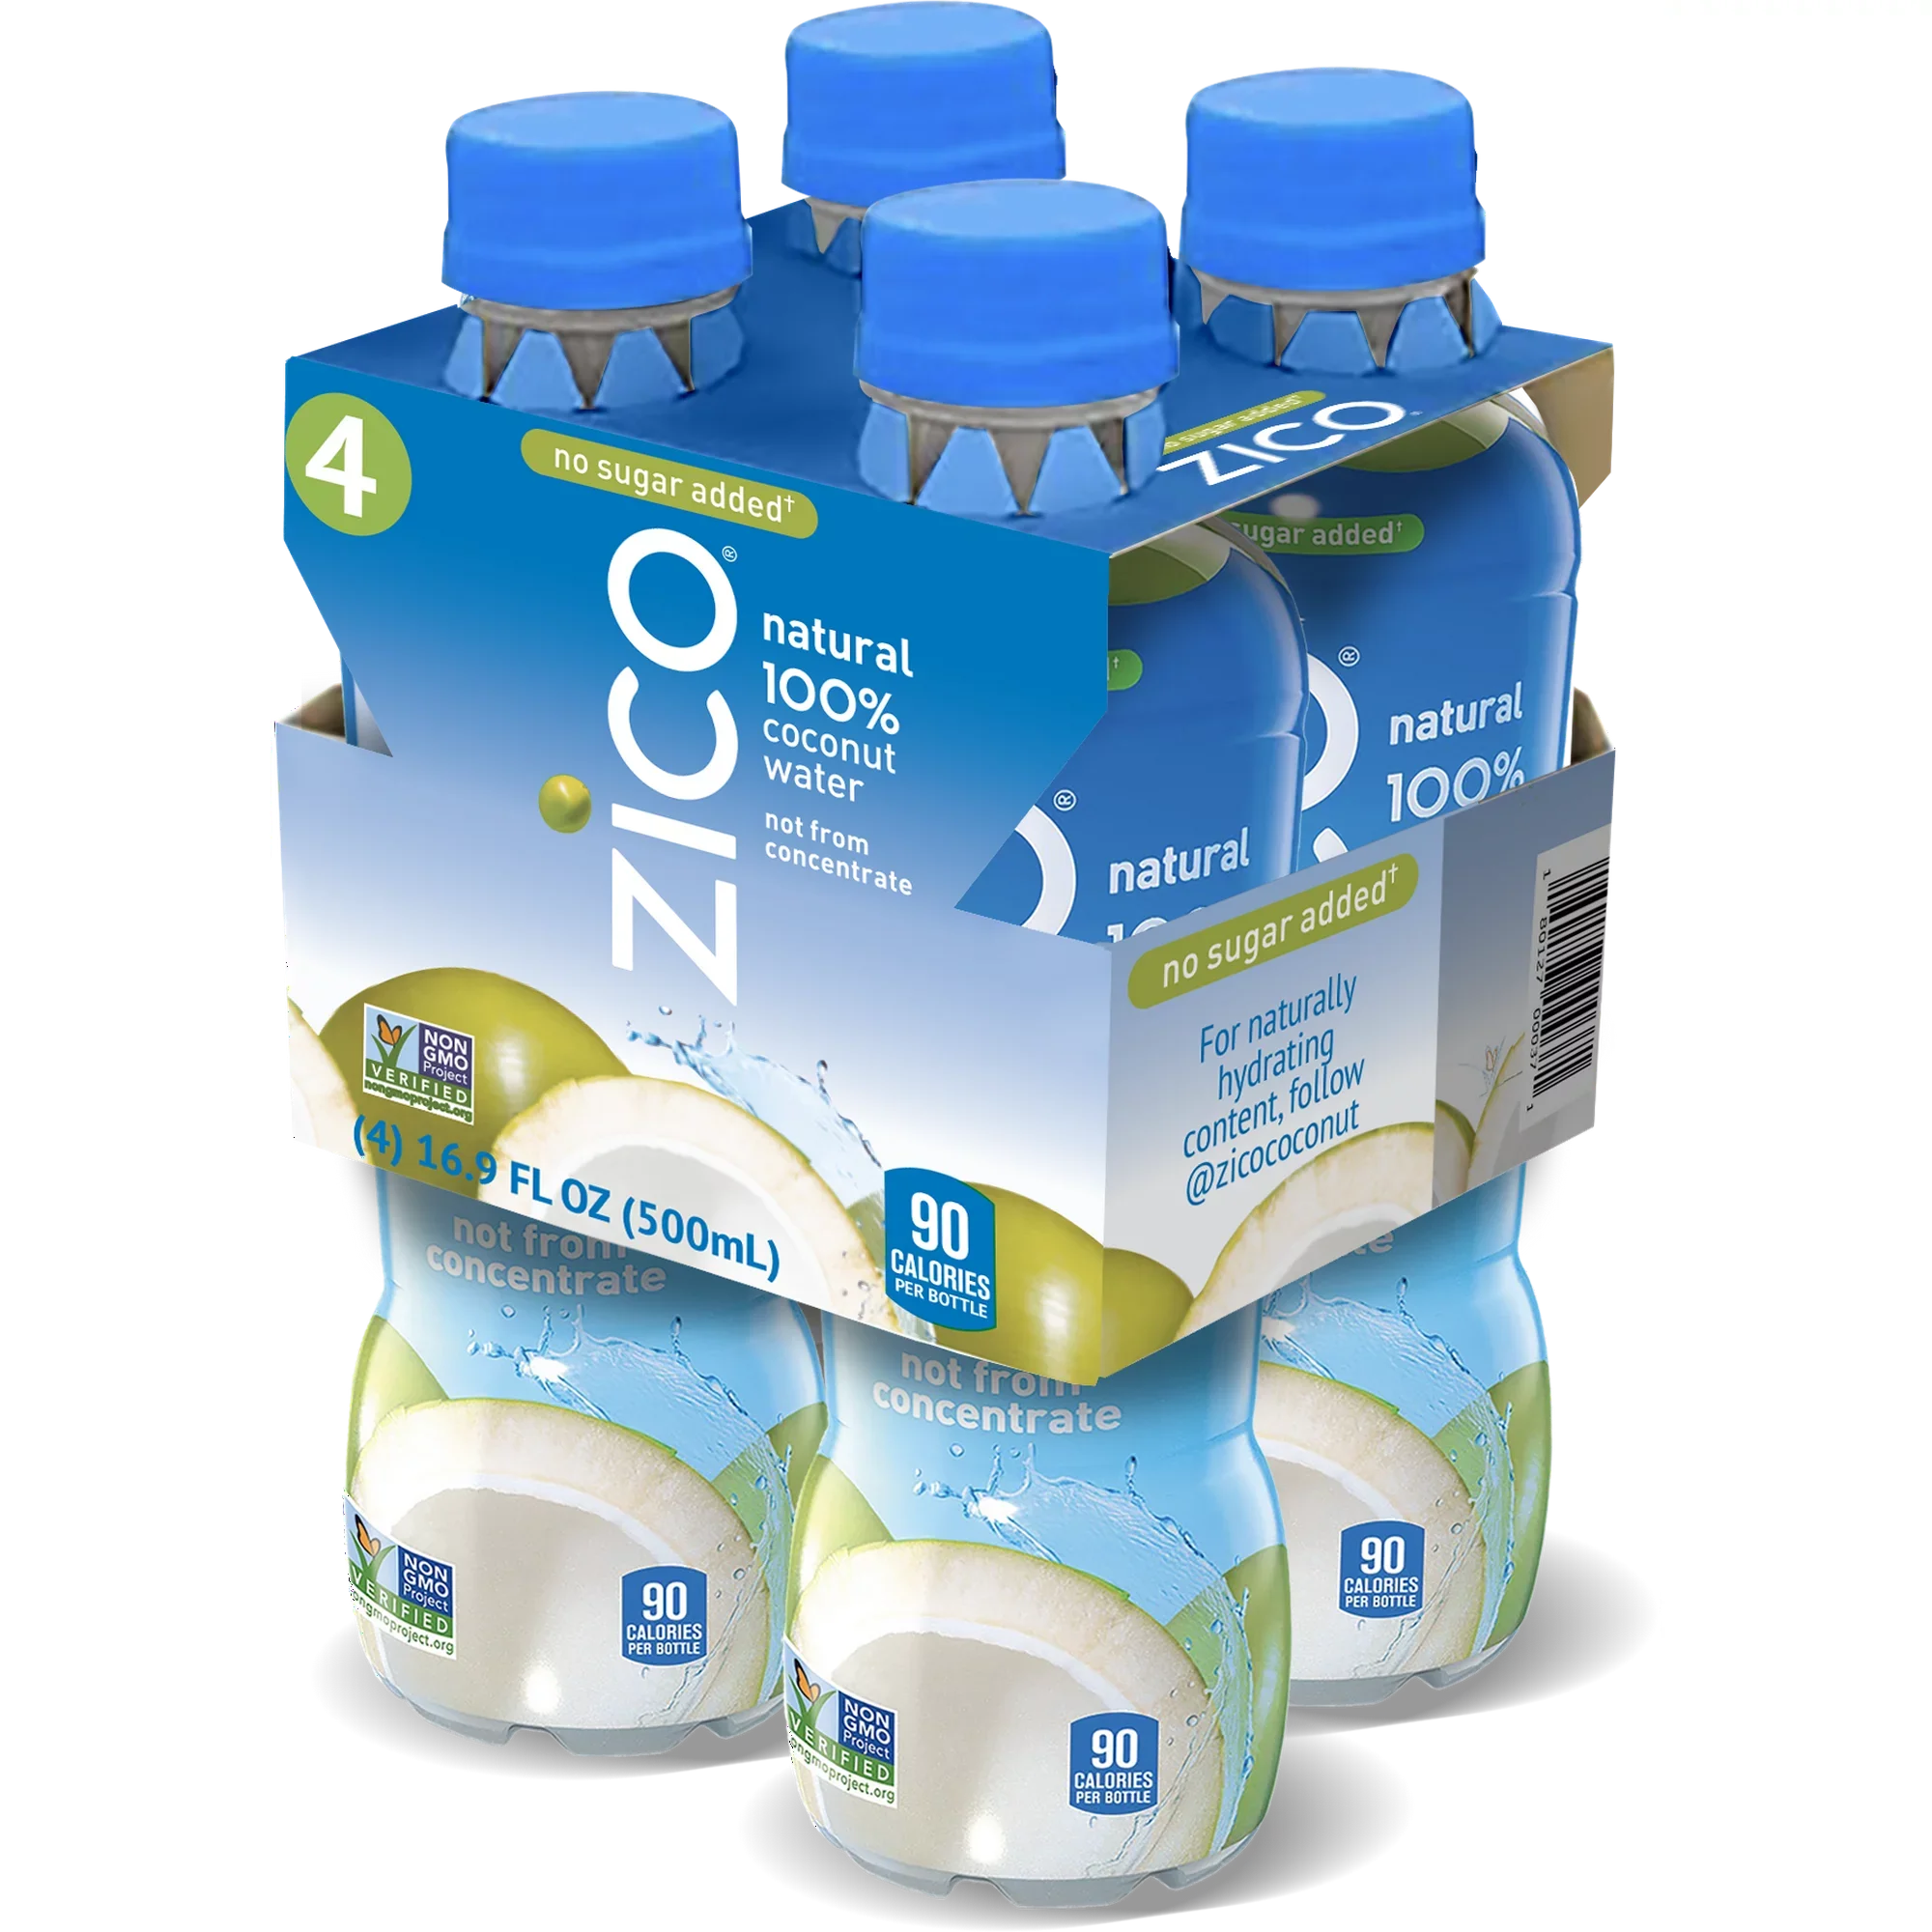 Wholesale prices with free shipping all over United States Zico 100% Natural Coconut Water, 16.9 fl oz, 4 Pack - Steven Deals